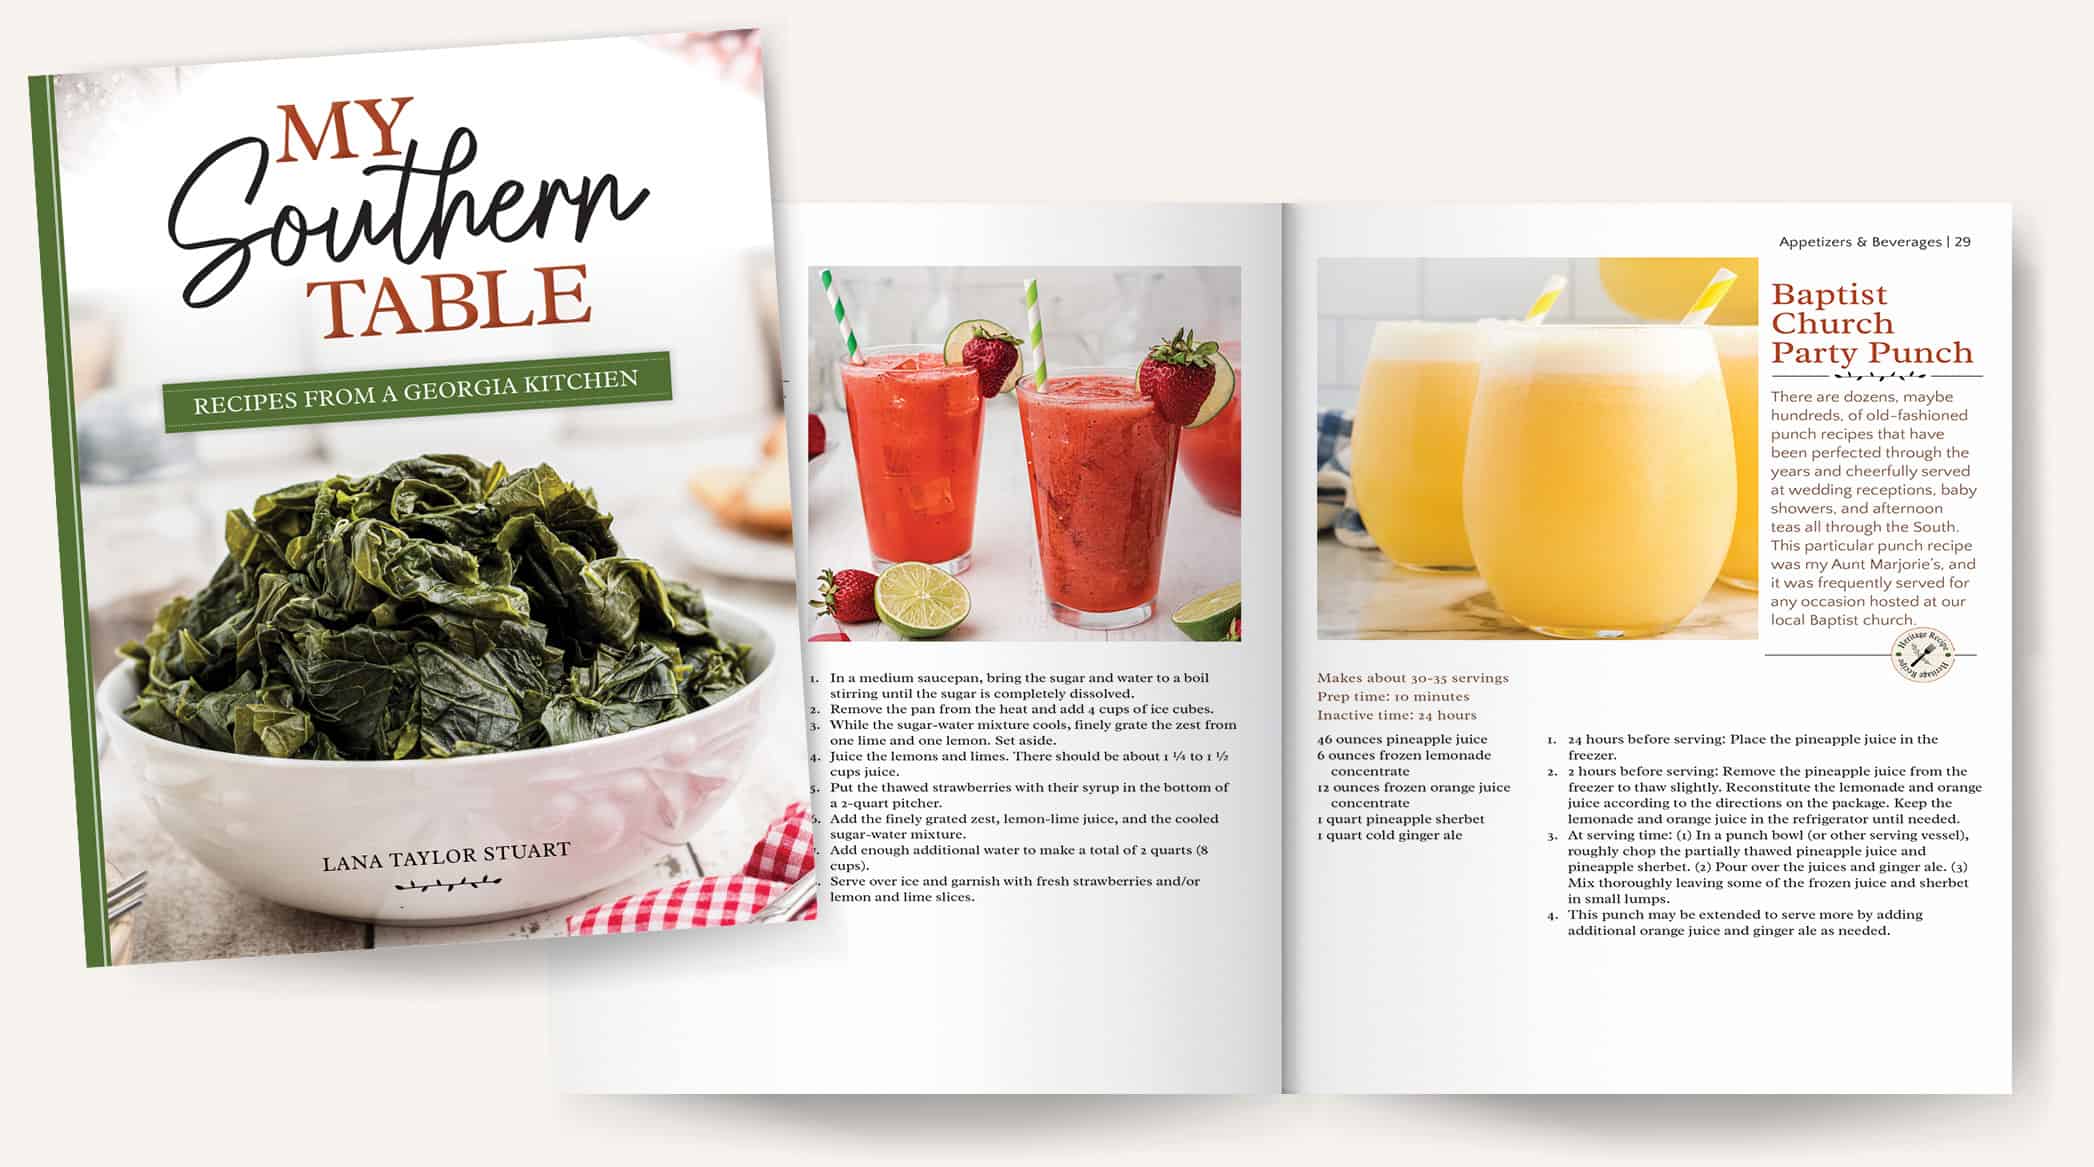 Cookbook mockup showing pages 28 and 29.